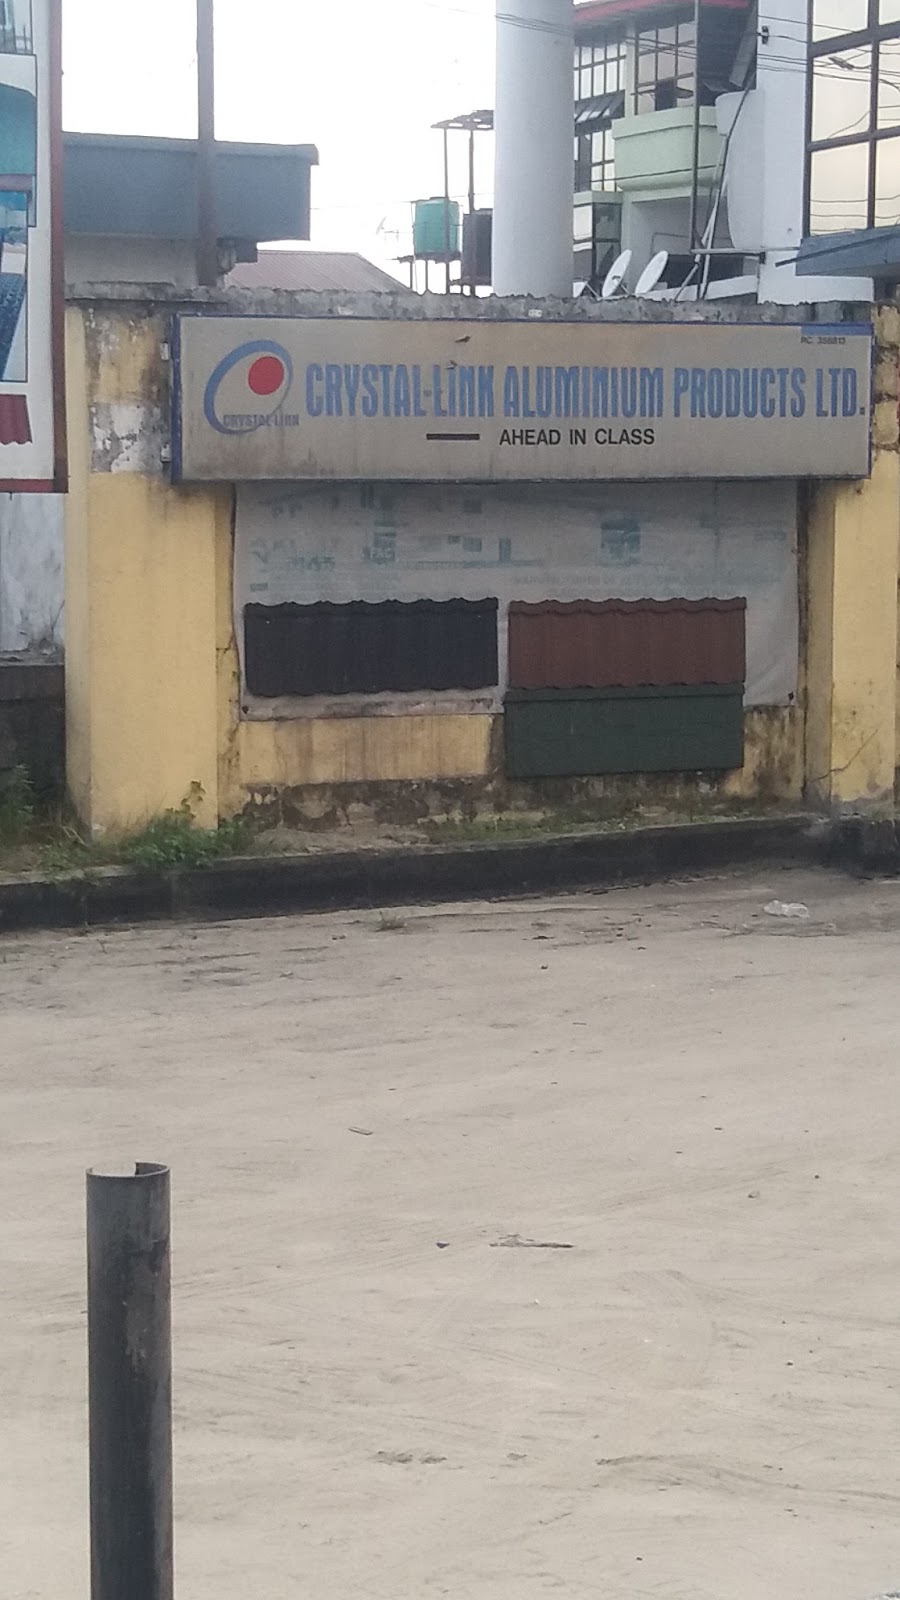 Crystal-Link Aluminium Products Limited